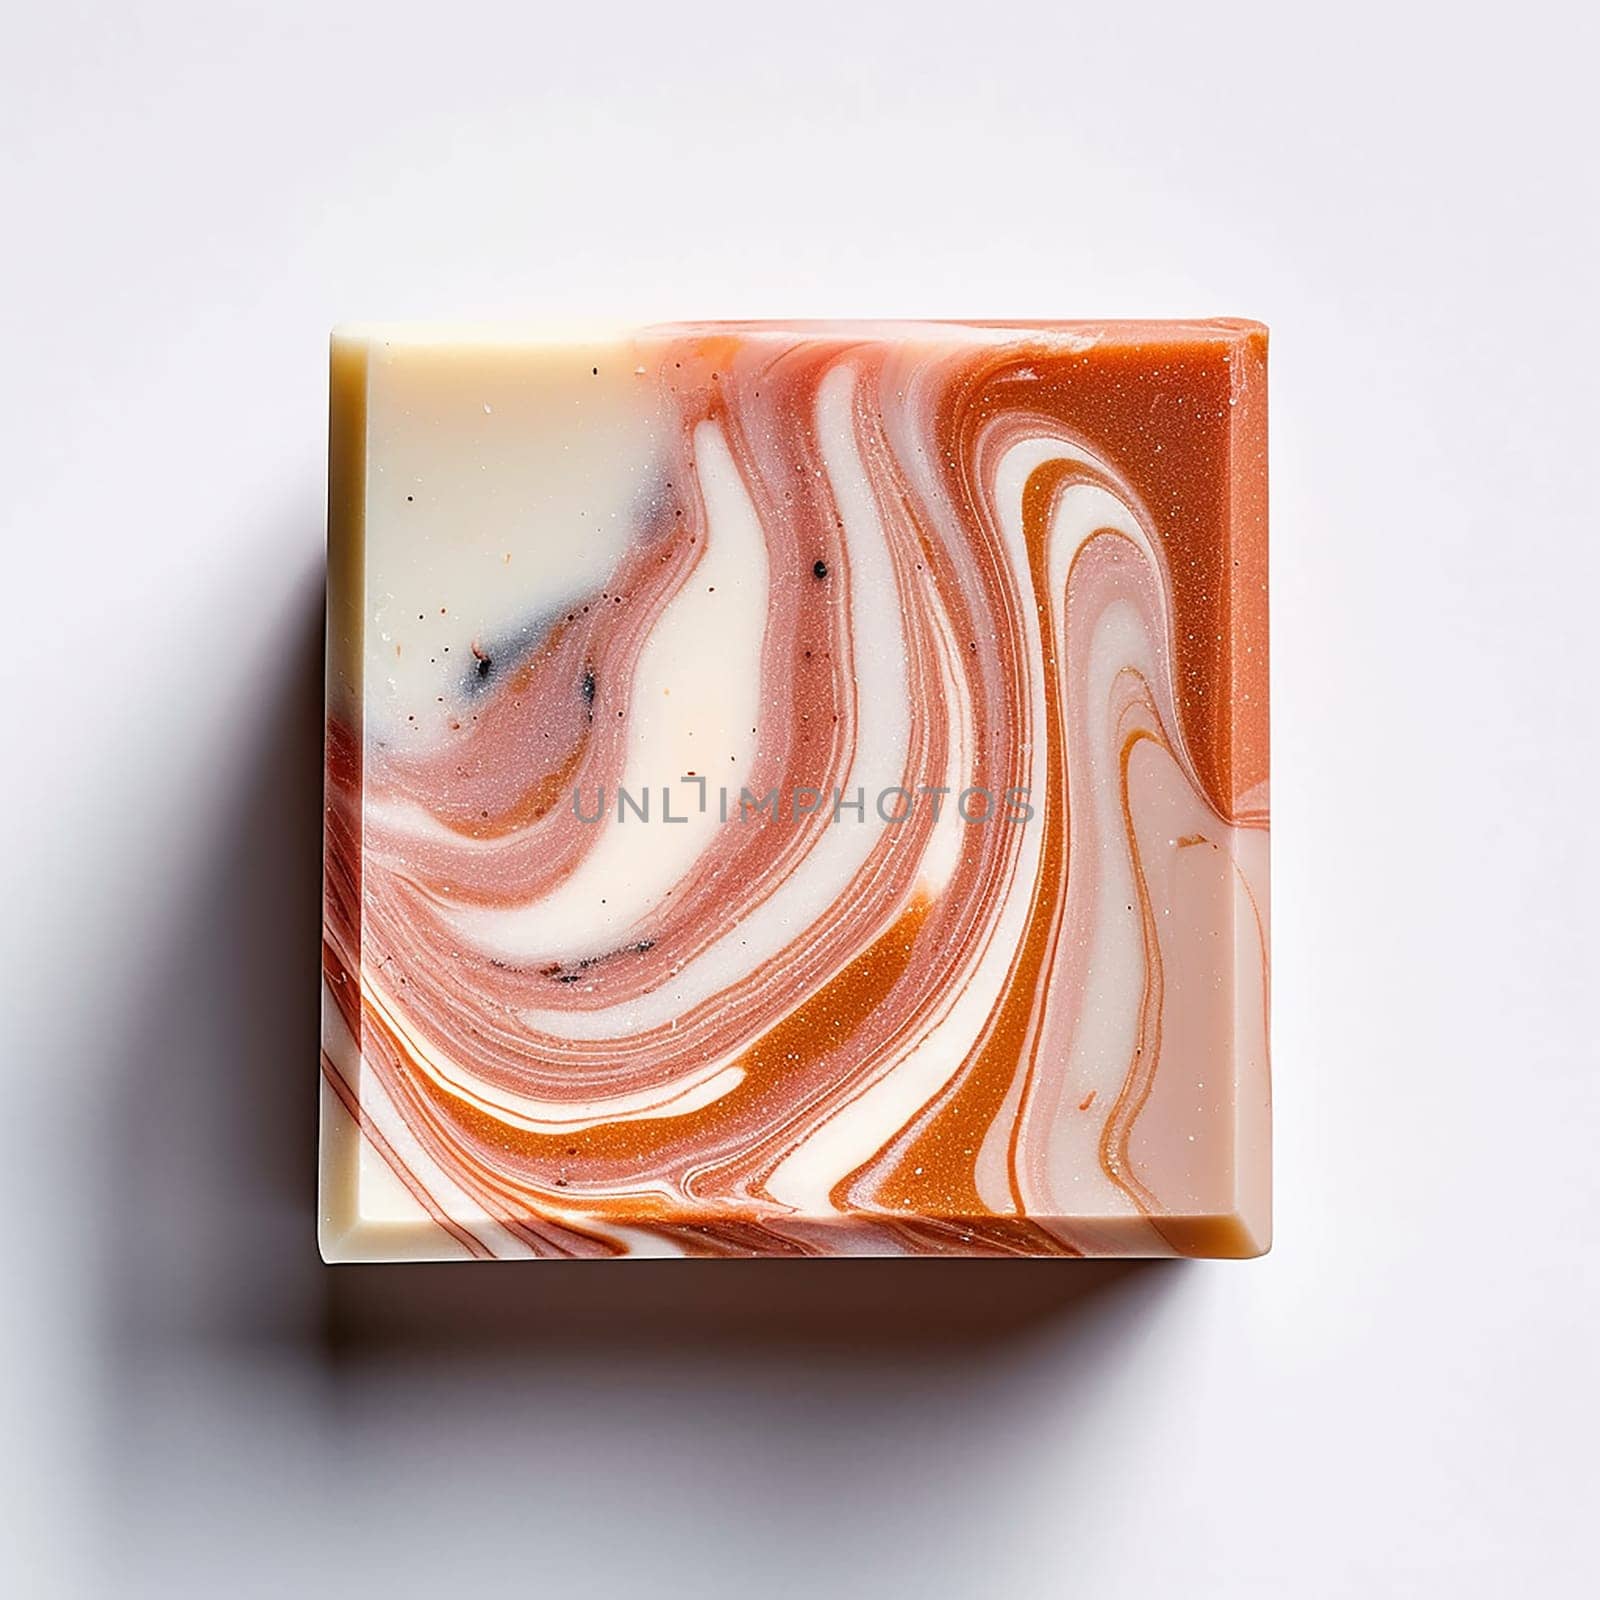 Handmade swirl patterned soap bar on a white background.